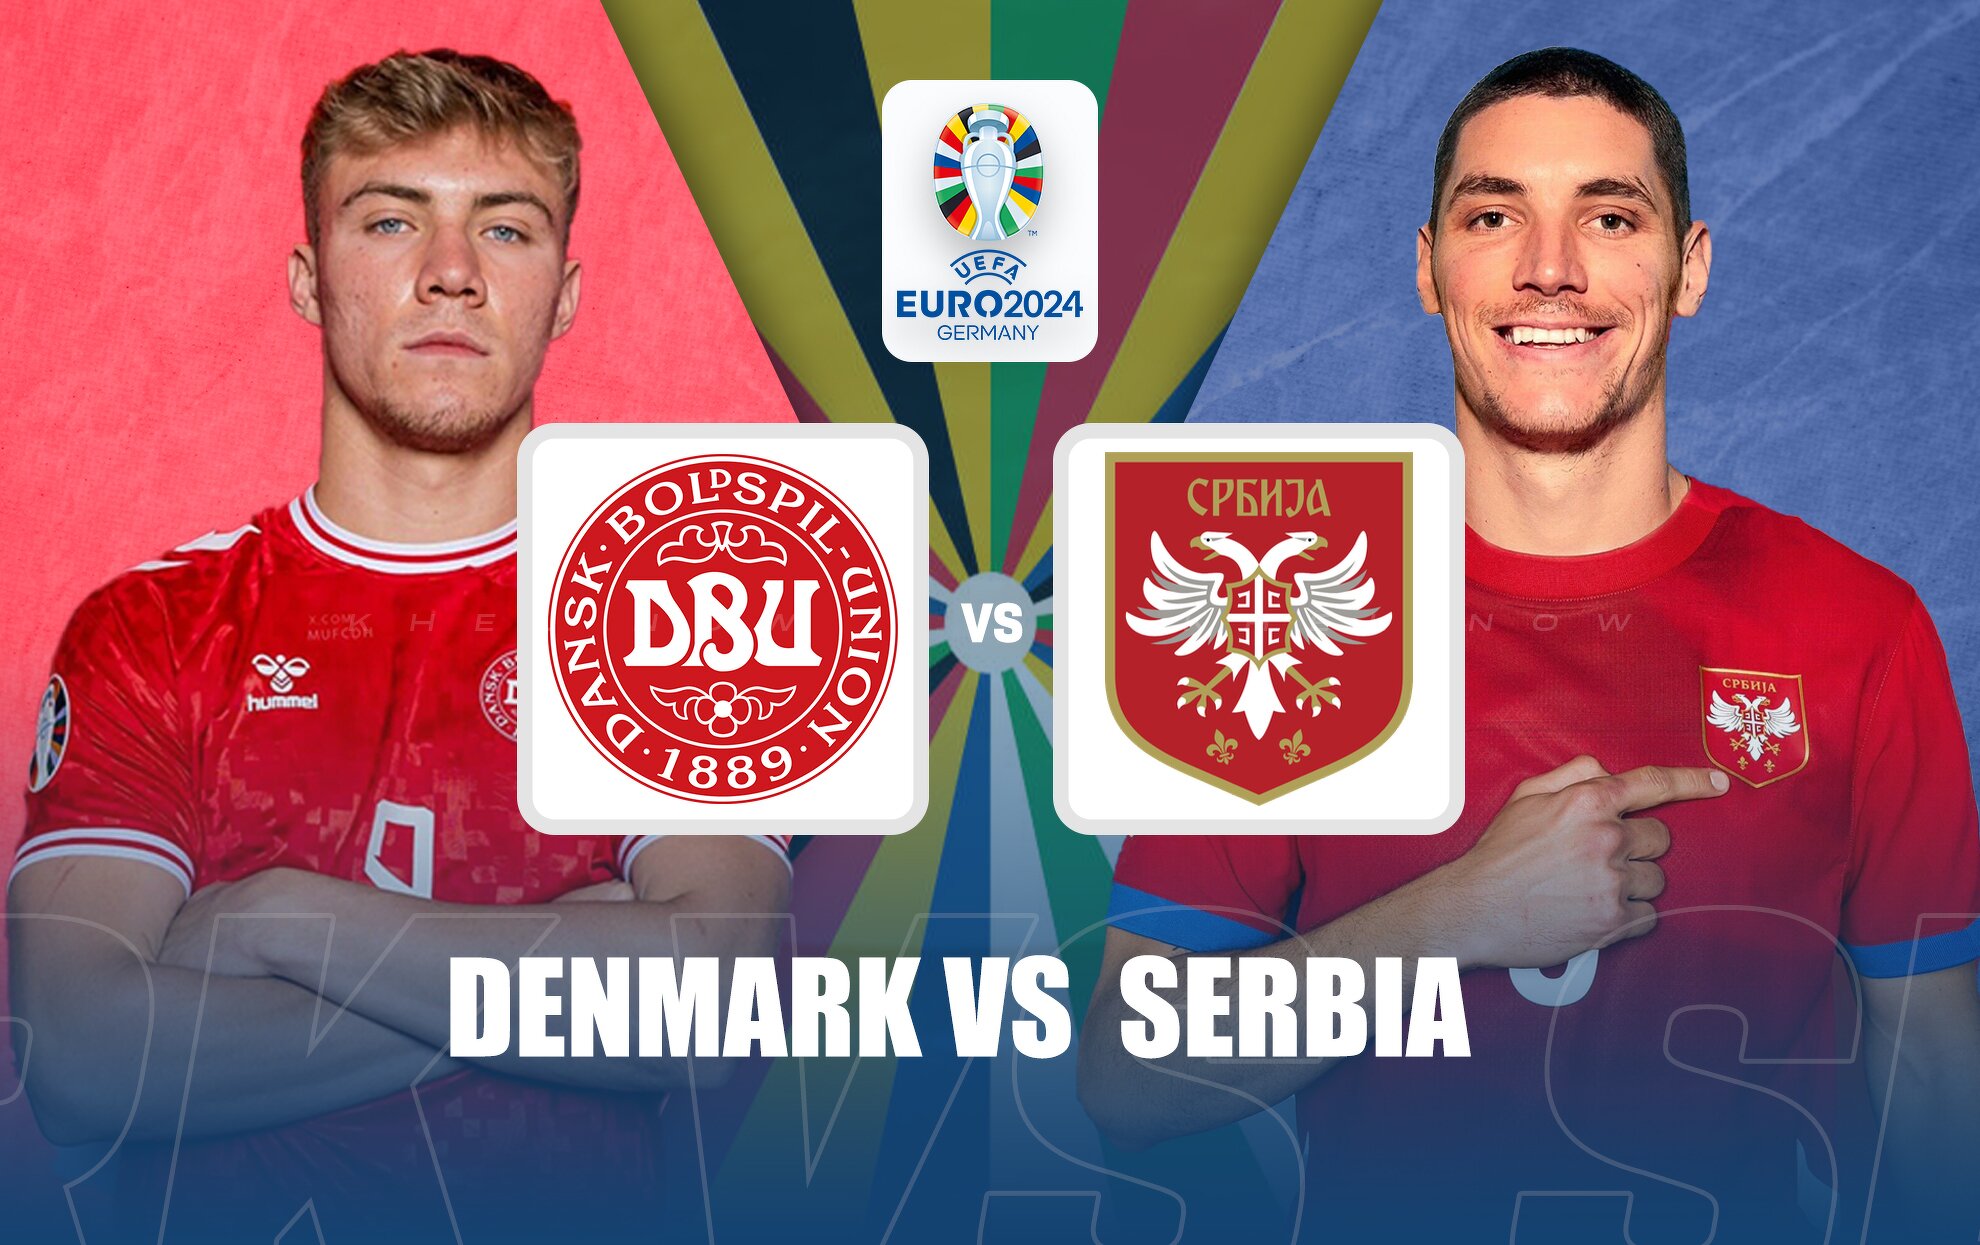 Denmark vs Serbia Live streaming, TV channel, kickoff time & where to